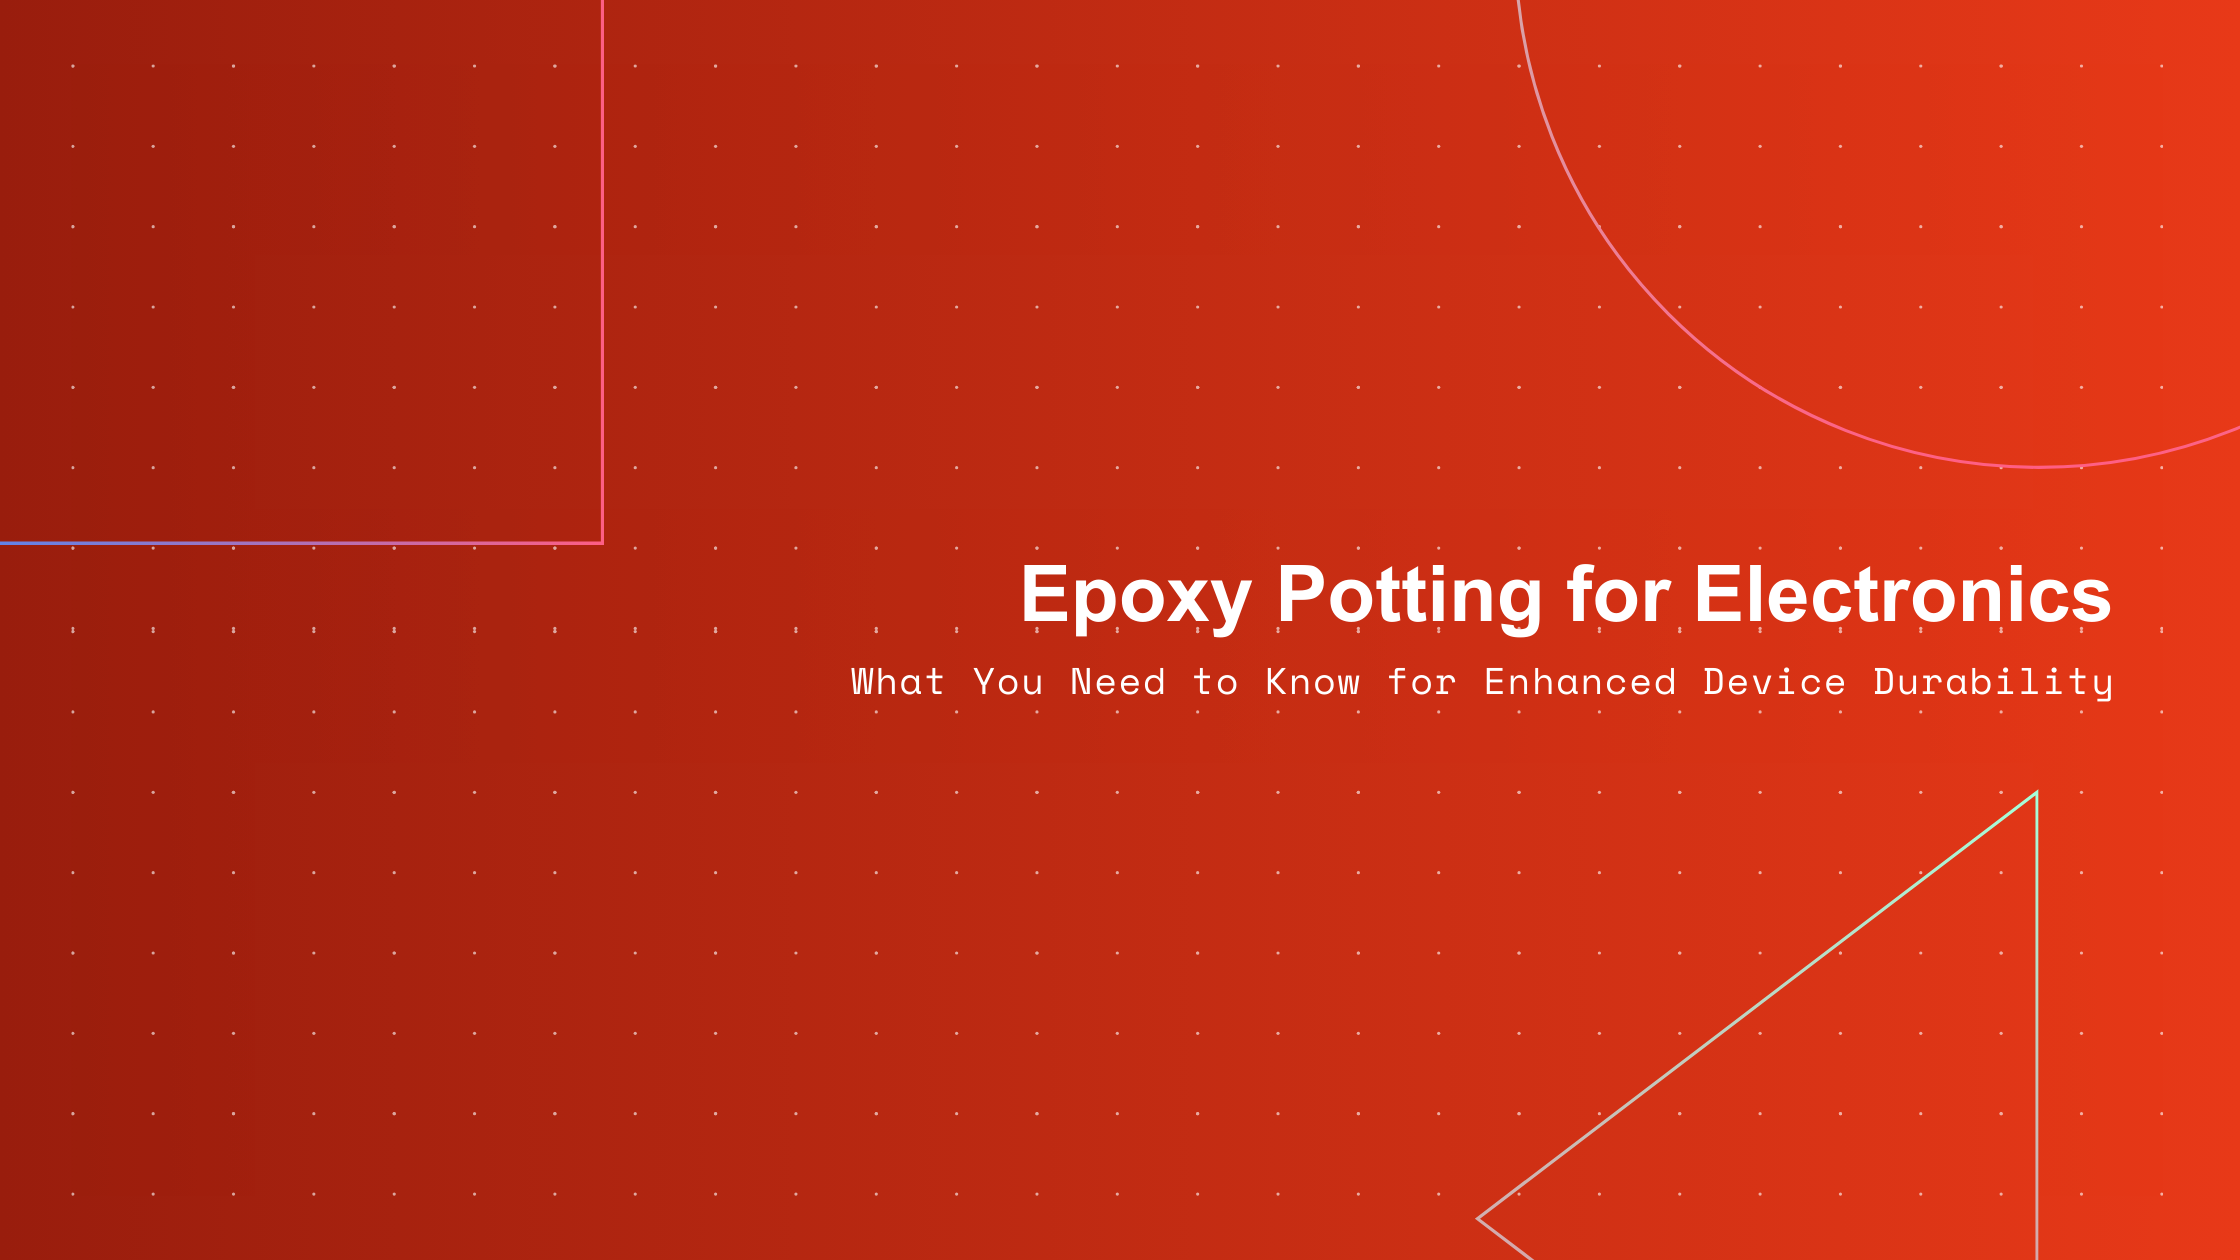 Epoxy Potting for Electronics: What You Need to Know